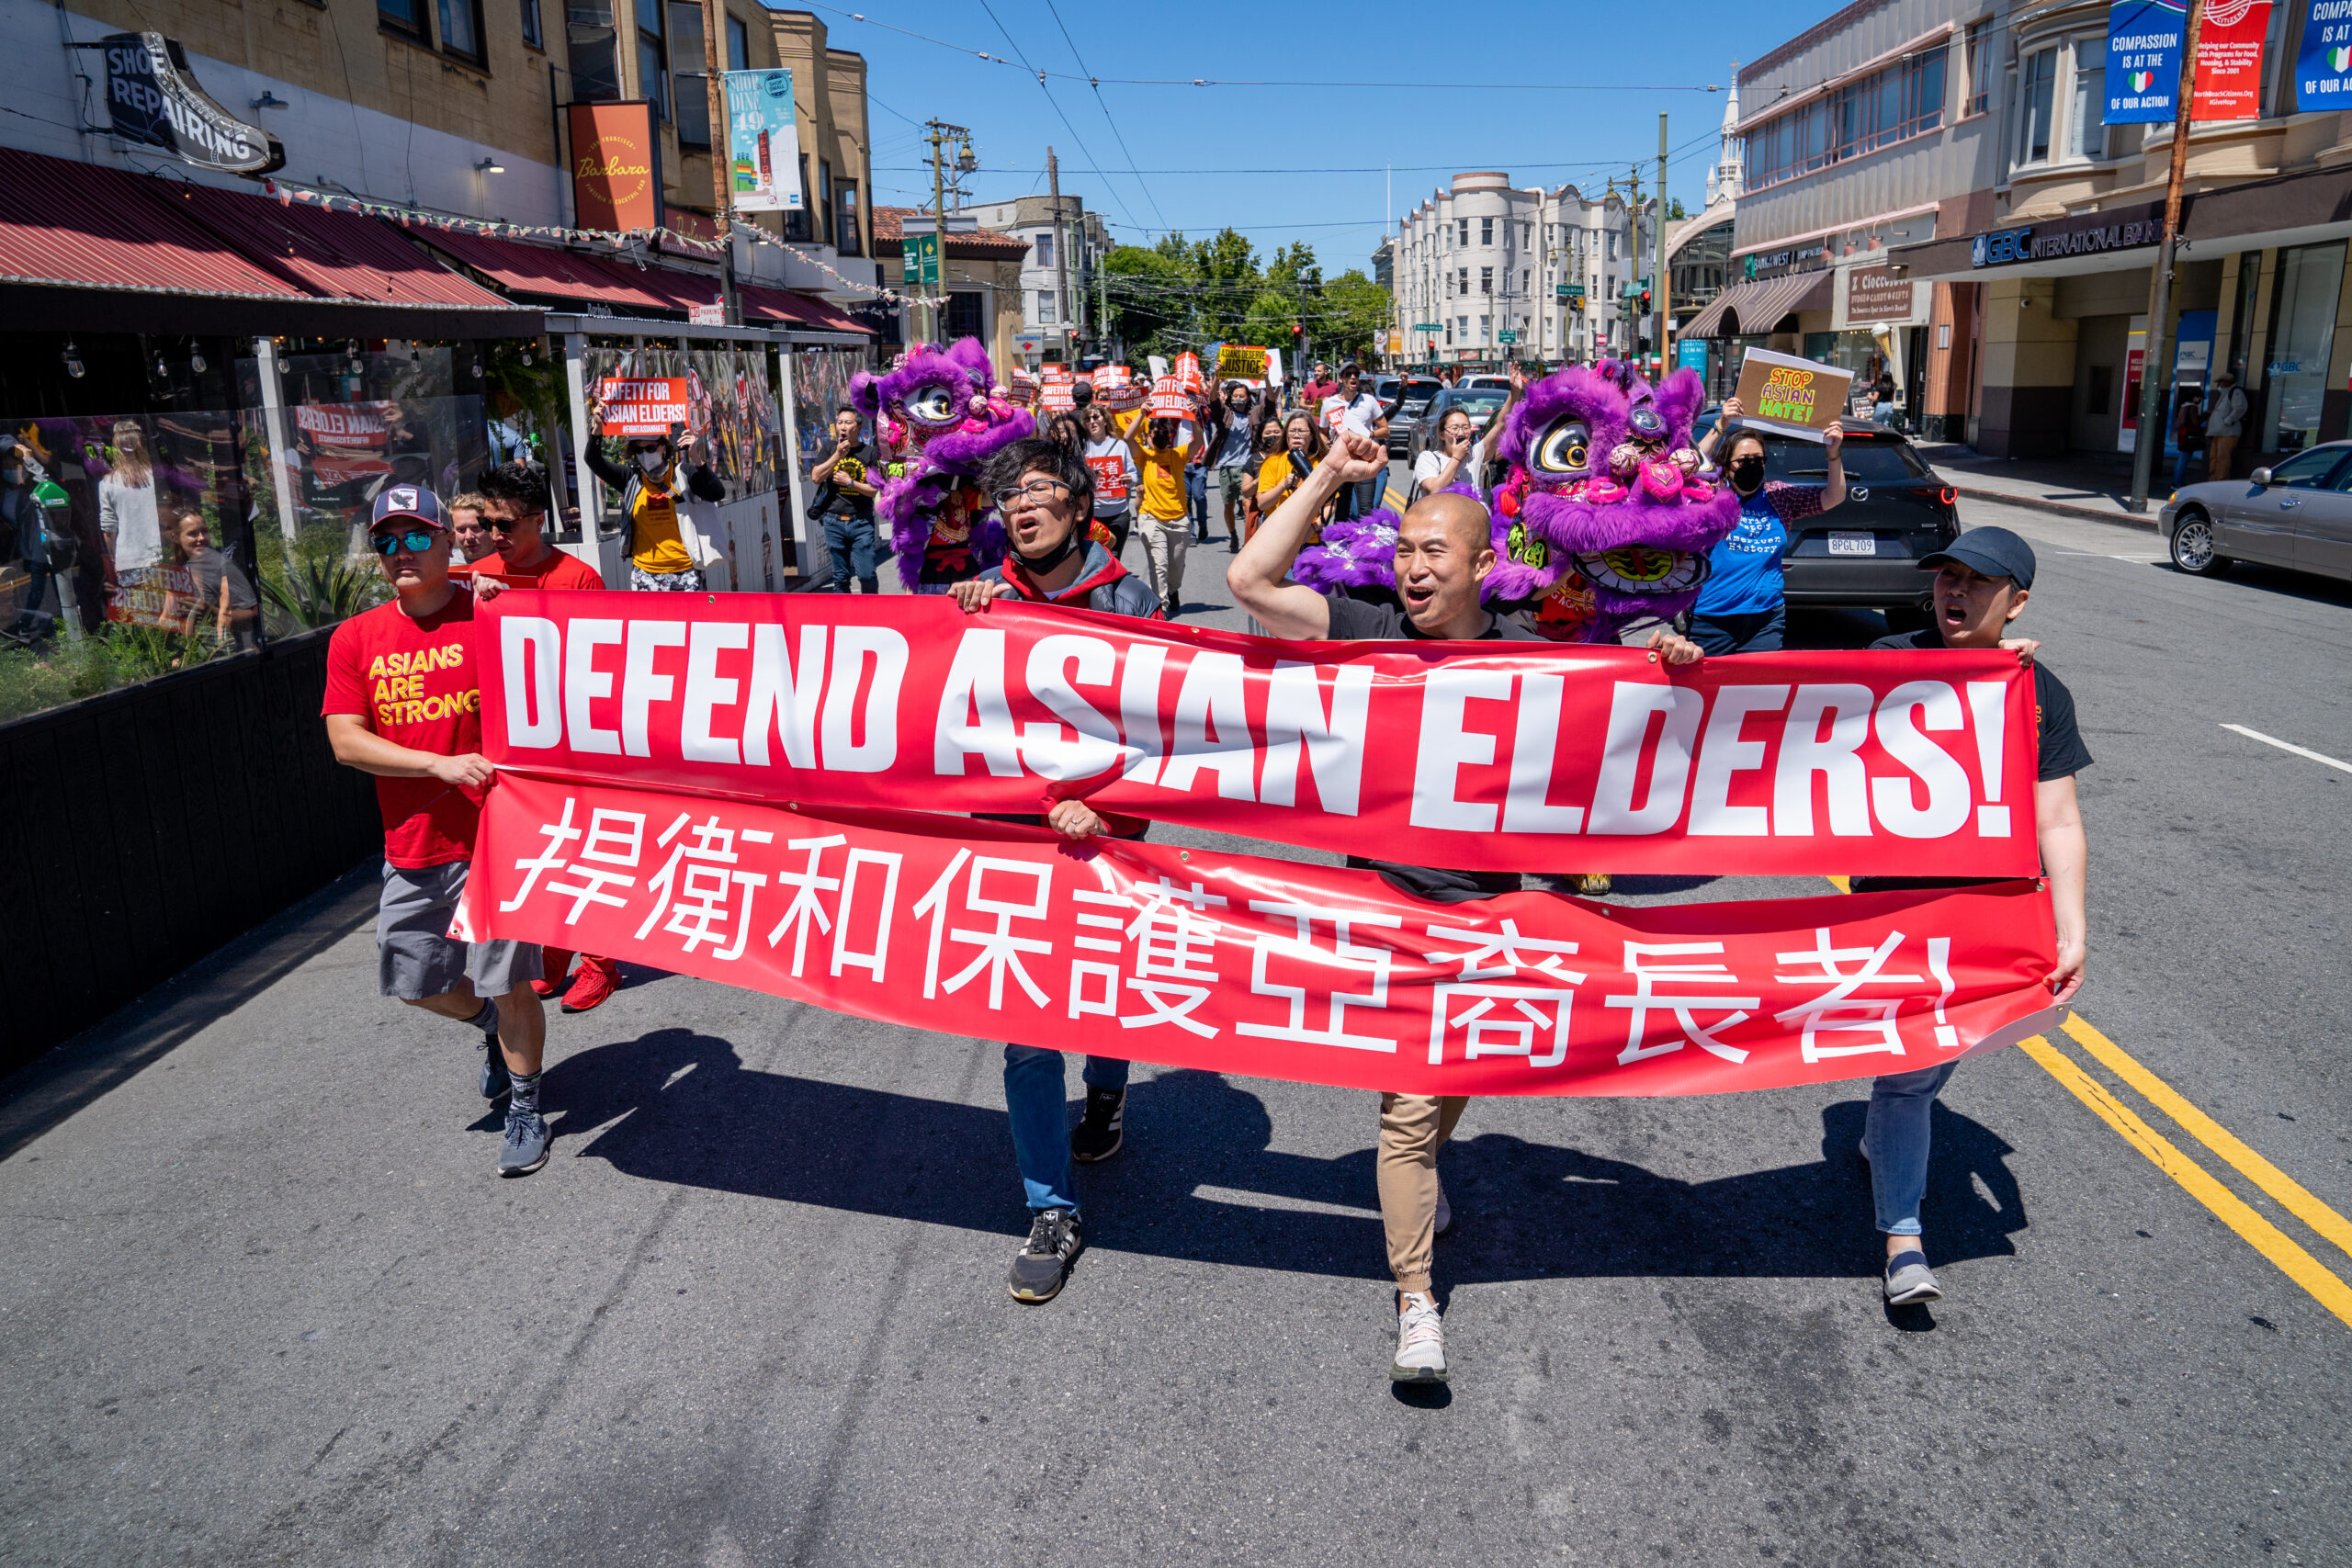 People march with a banner reading "DEFEND ASIAN ELDERS!" in English and Chinese, promoting anti-racism.